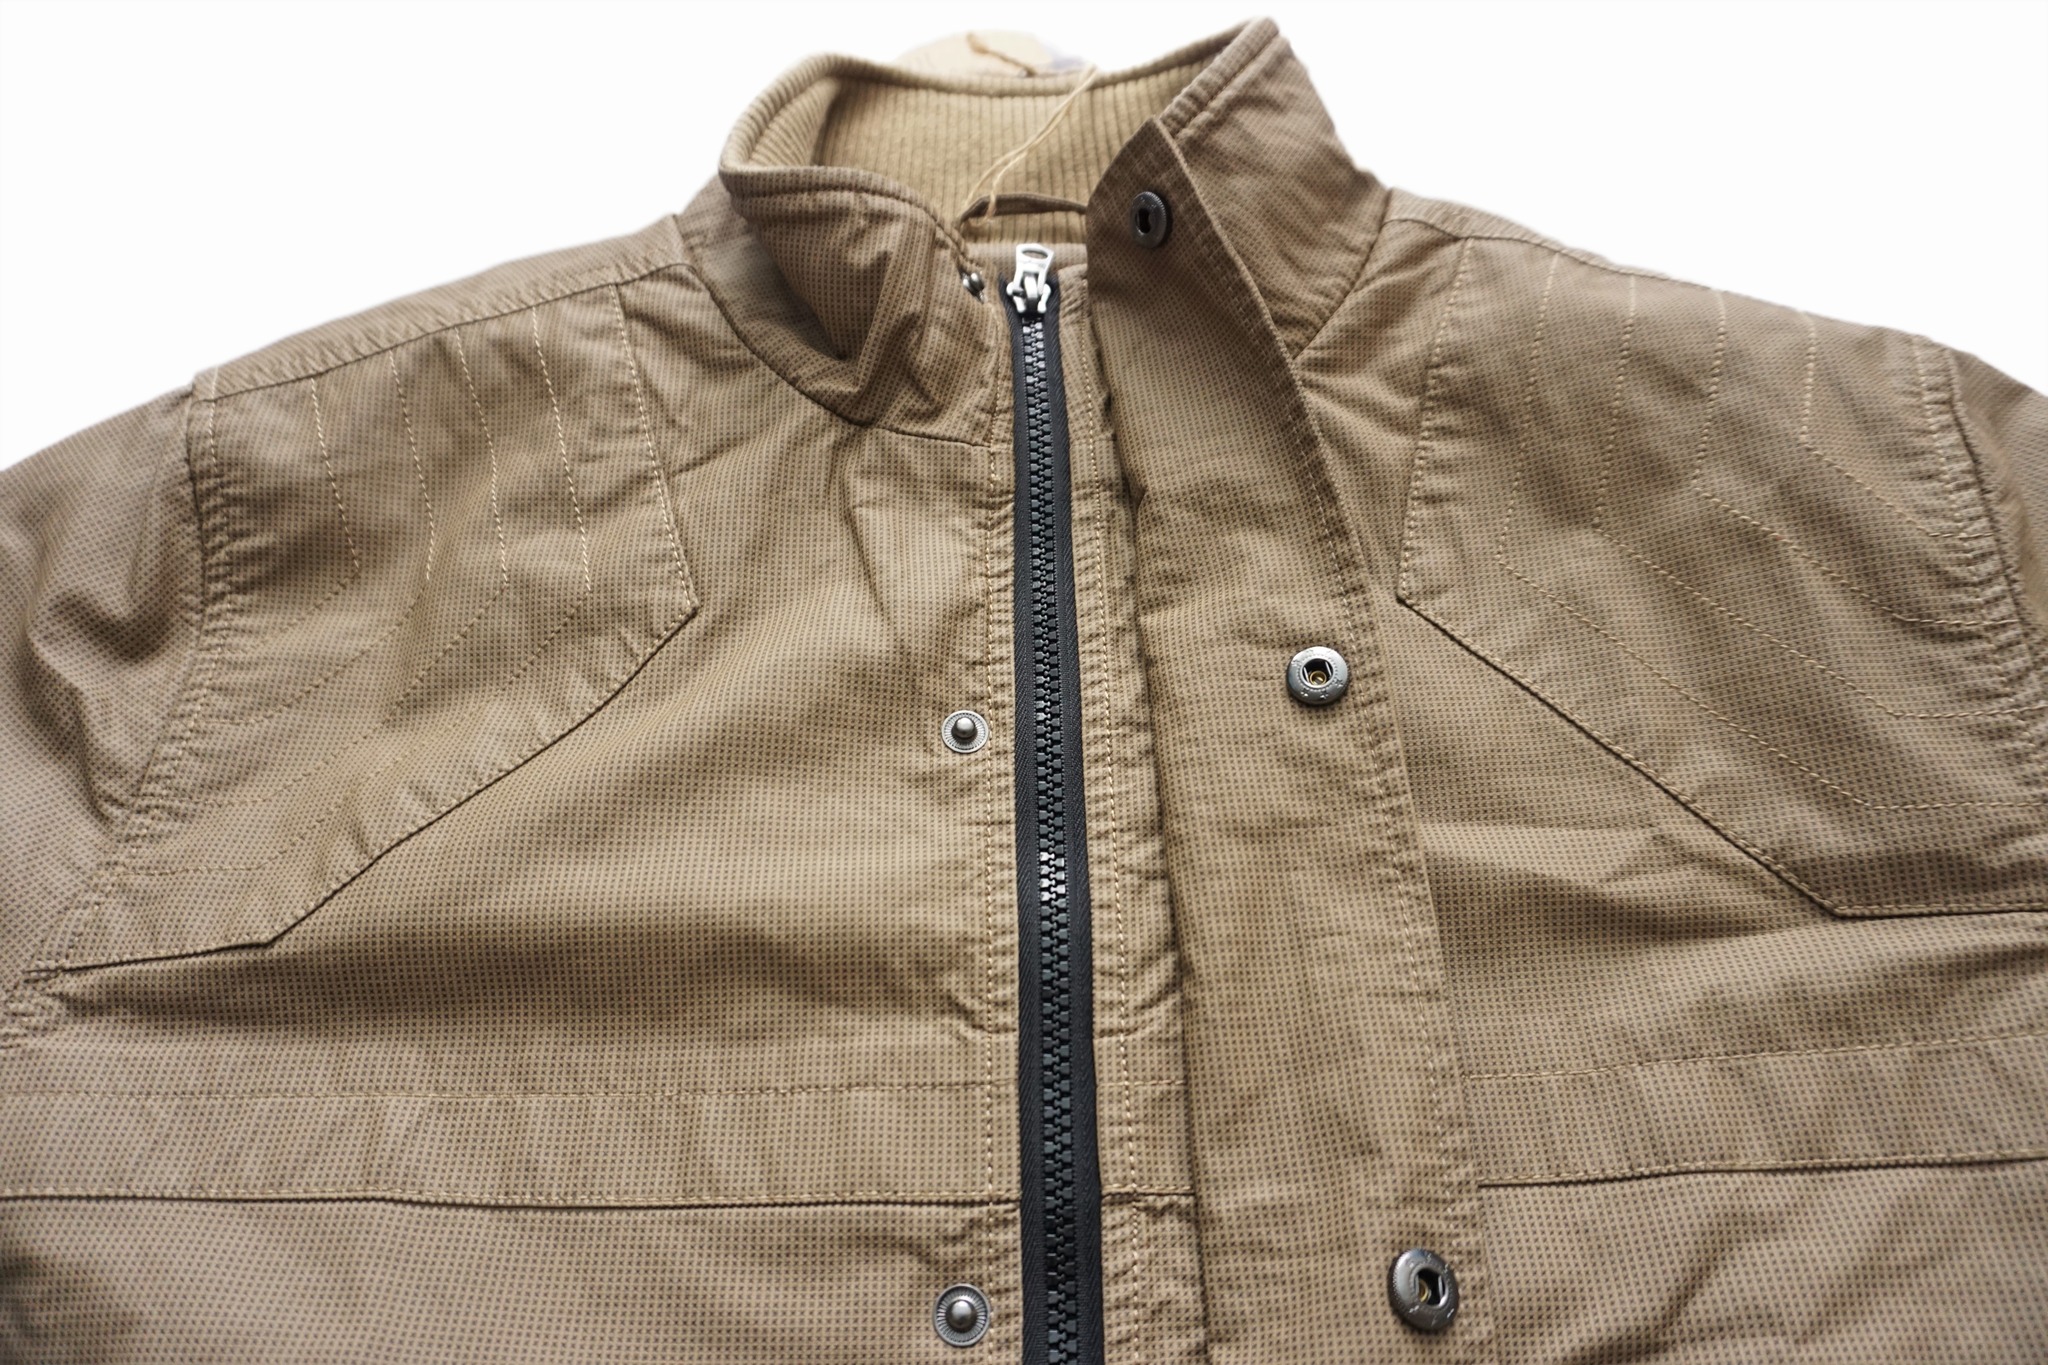 Wrangler Rubberized Khaki Men’s Jacket is Made for Work and Play ...